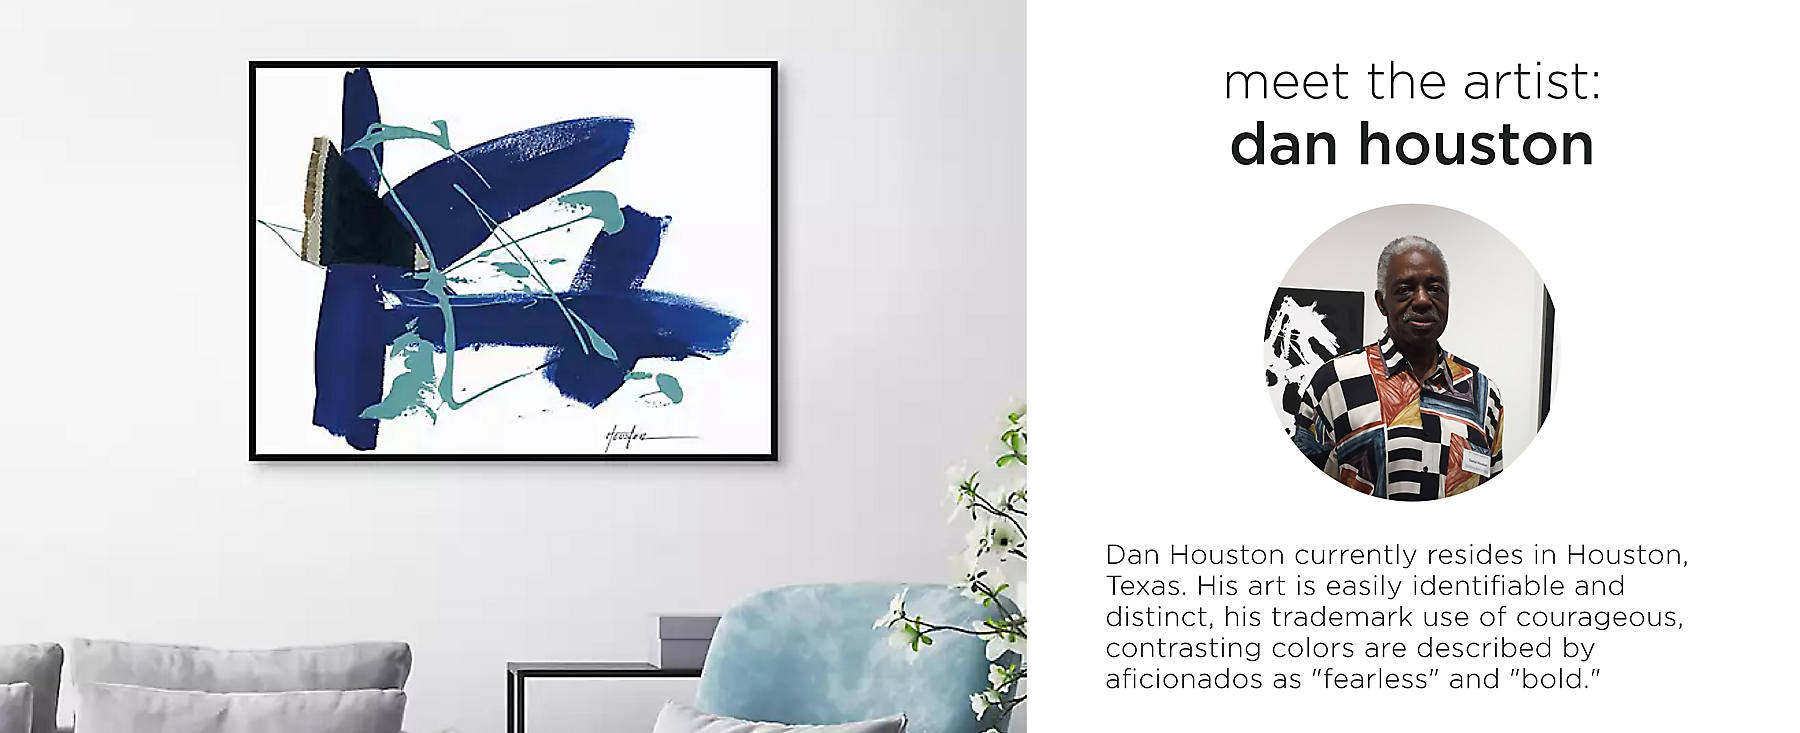 Meet the artist: Dan Houston currently resides in Houston, Texas. His art is easily identifiable and distinct, his trademark use of courageous, contrasting colors are described by aficionados as 'fearless' and 'bold.'